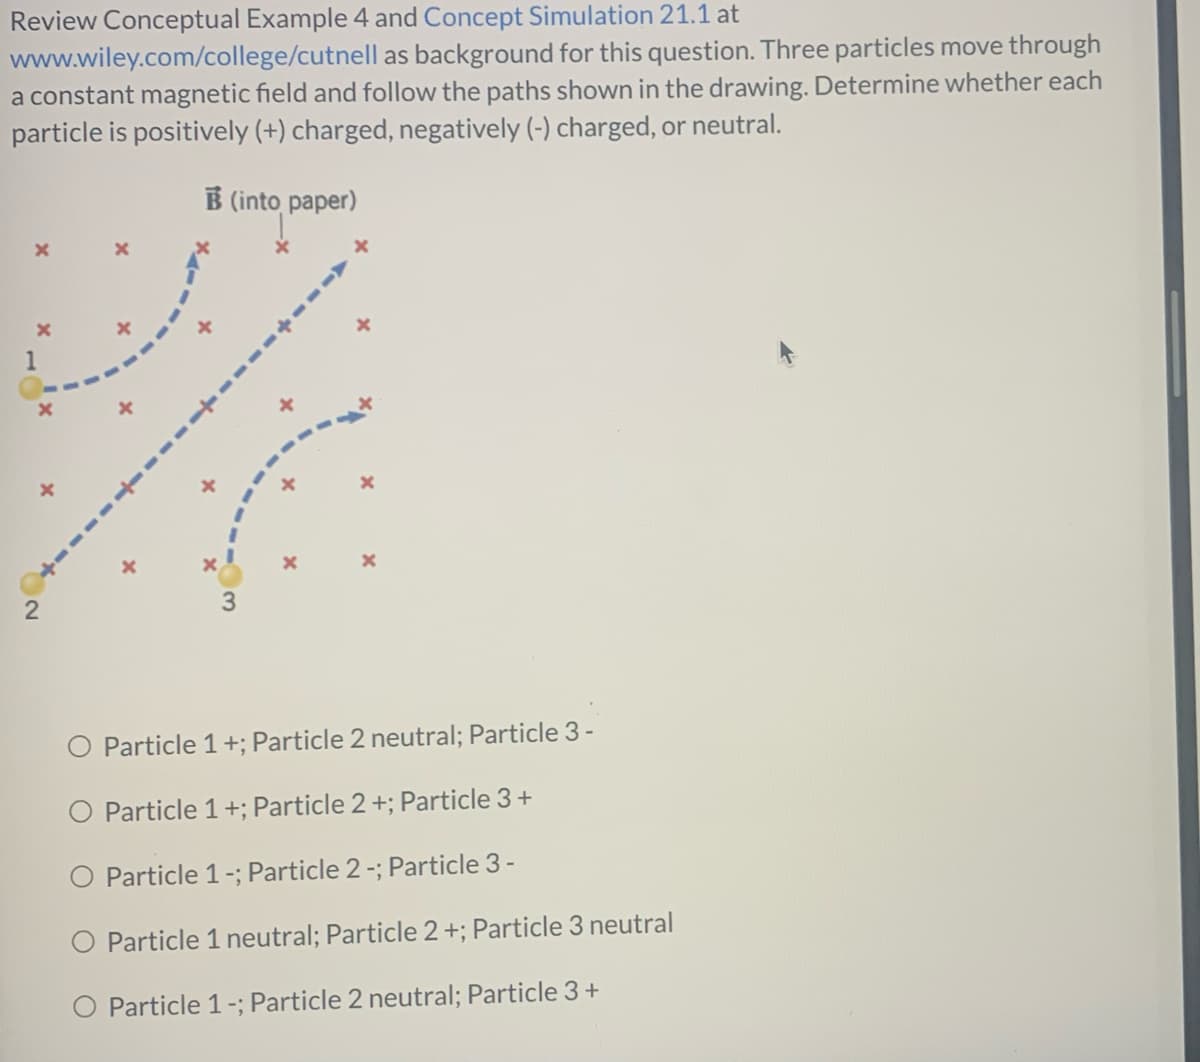 Review Conceptual Example 4 and Concept Simulation 21.1 at
www.wiley.com/college/cutnell as background for this question. Three particles move through
a constant magnetic field and follow the paths shown in the drawing. Determine whether each
particle is positively (+) charged, negatively (-) charged, or neutral.
B (into paper)
Particle 1+; Particle 2 neutral; Particle 3-
O Particle 1+; Particle 2 +; Particle 3+
O Particle 1-; Particle 2-; Particle 3-
O Particle 1 neutral; Particle 2+; Particle 3 neutral
O Particle 1-; Particle 2 neutral; Particle 3 +
